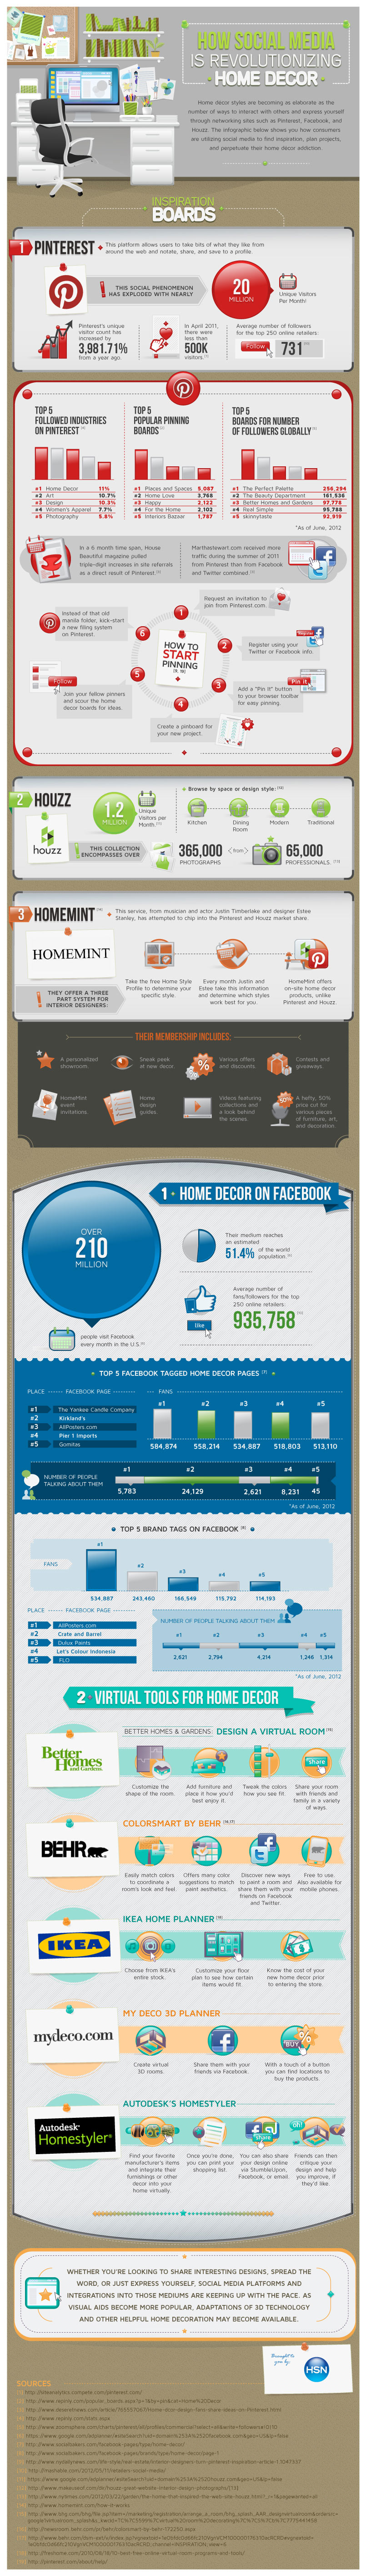 How To Make Social Media Your Personal Home Decorator